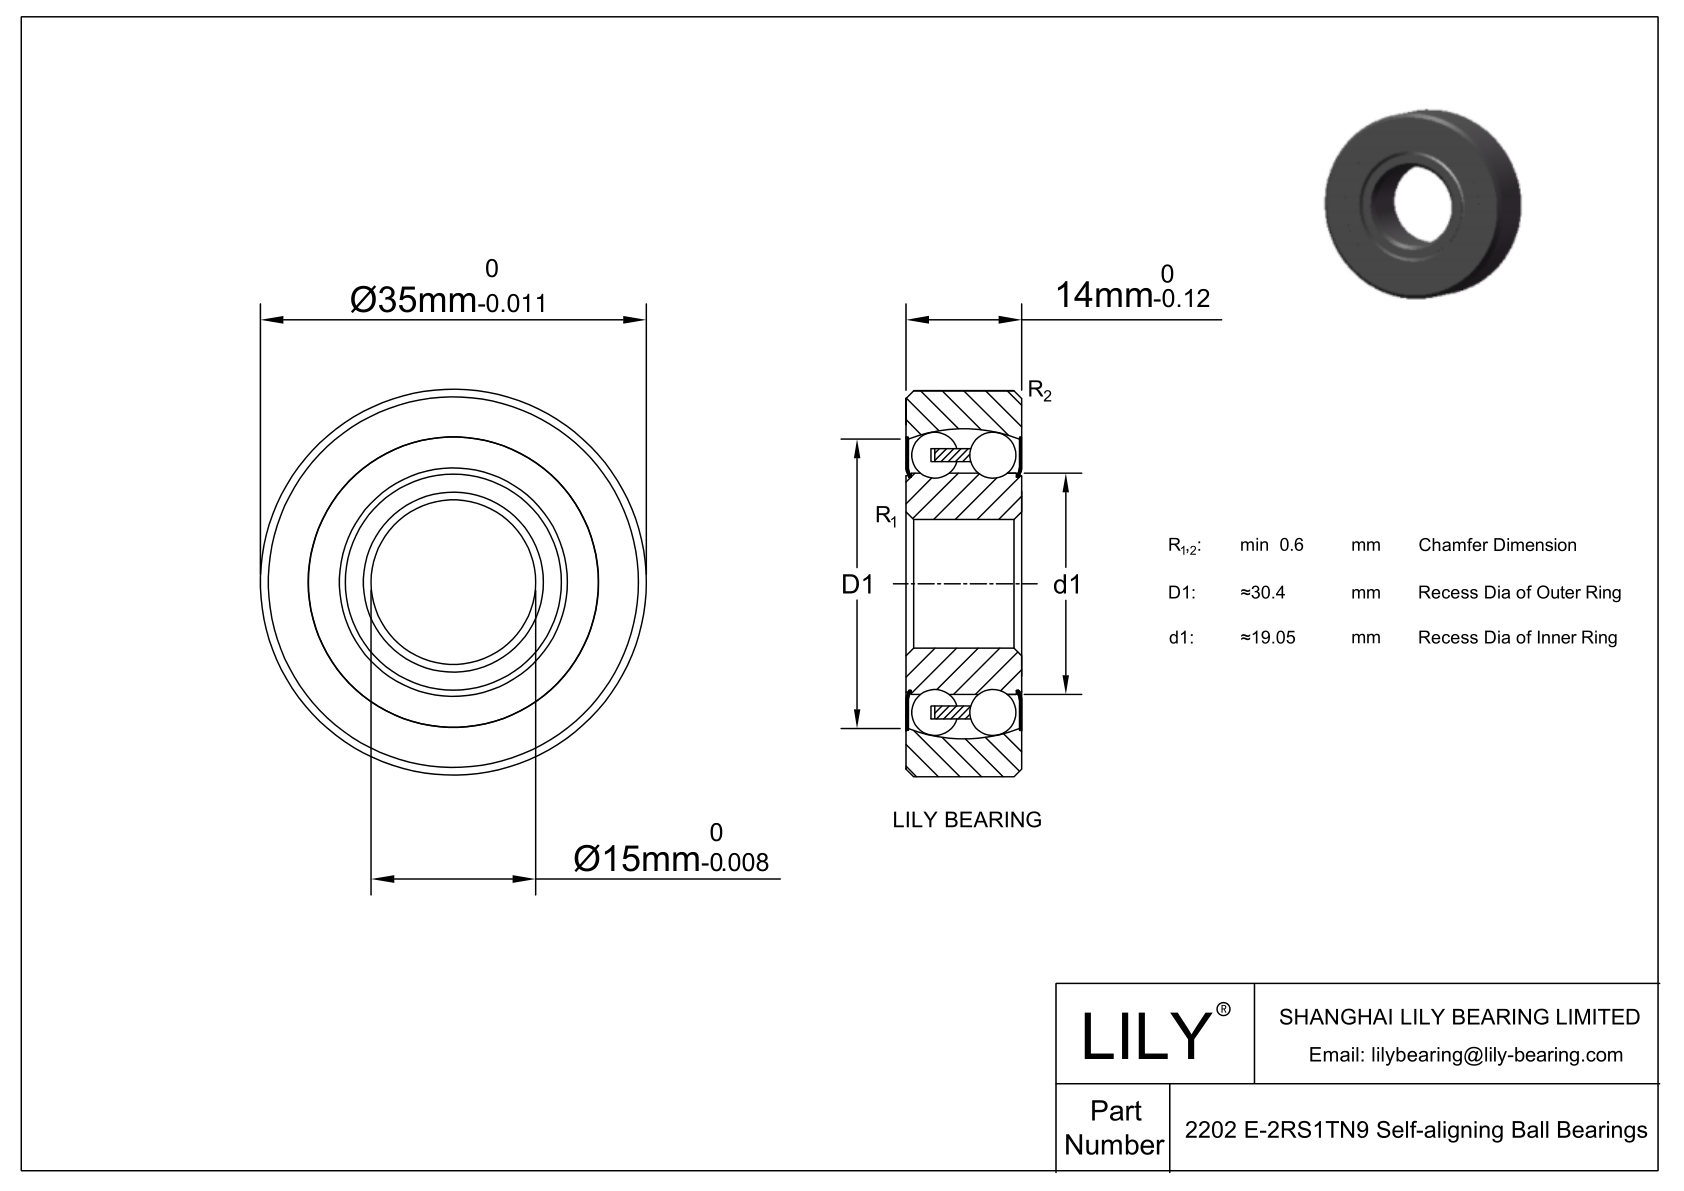 CE2202 E-SIPP Silicon Nitride Self Aligning Ball Bearings cad drawing